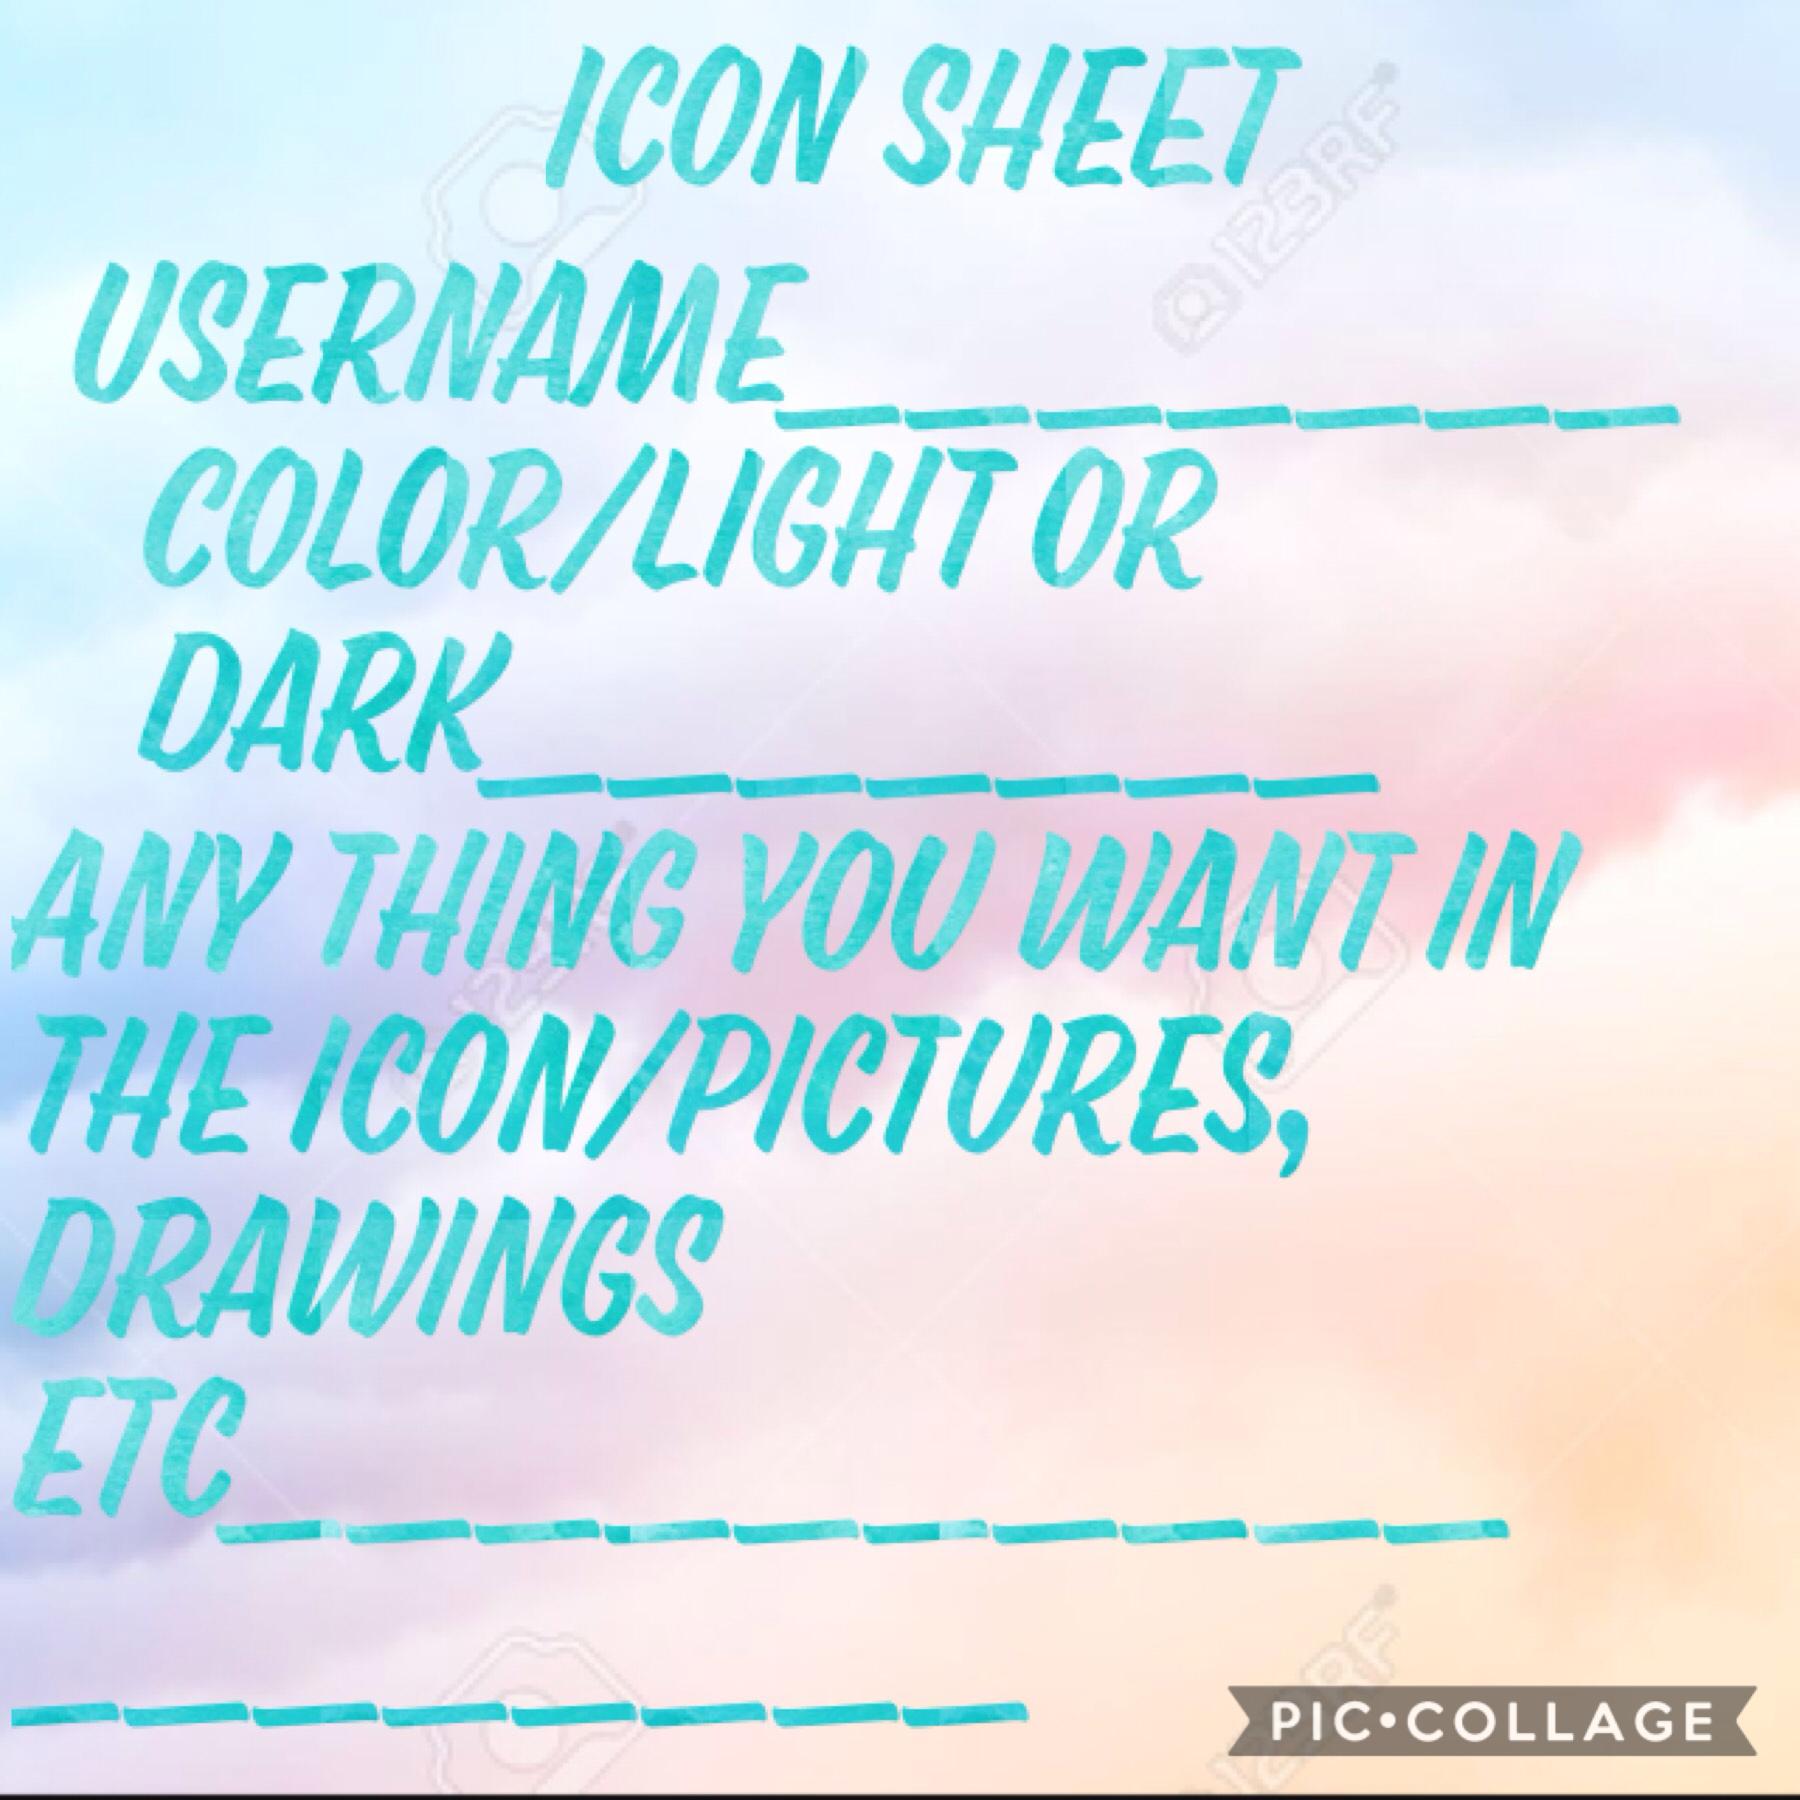 In the mood of making Icons